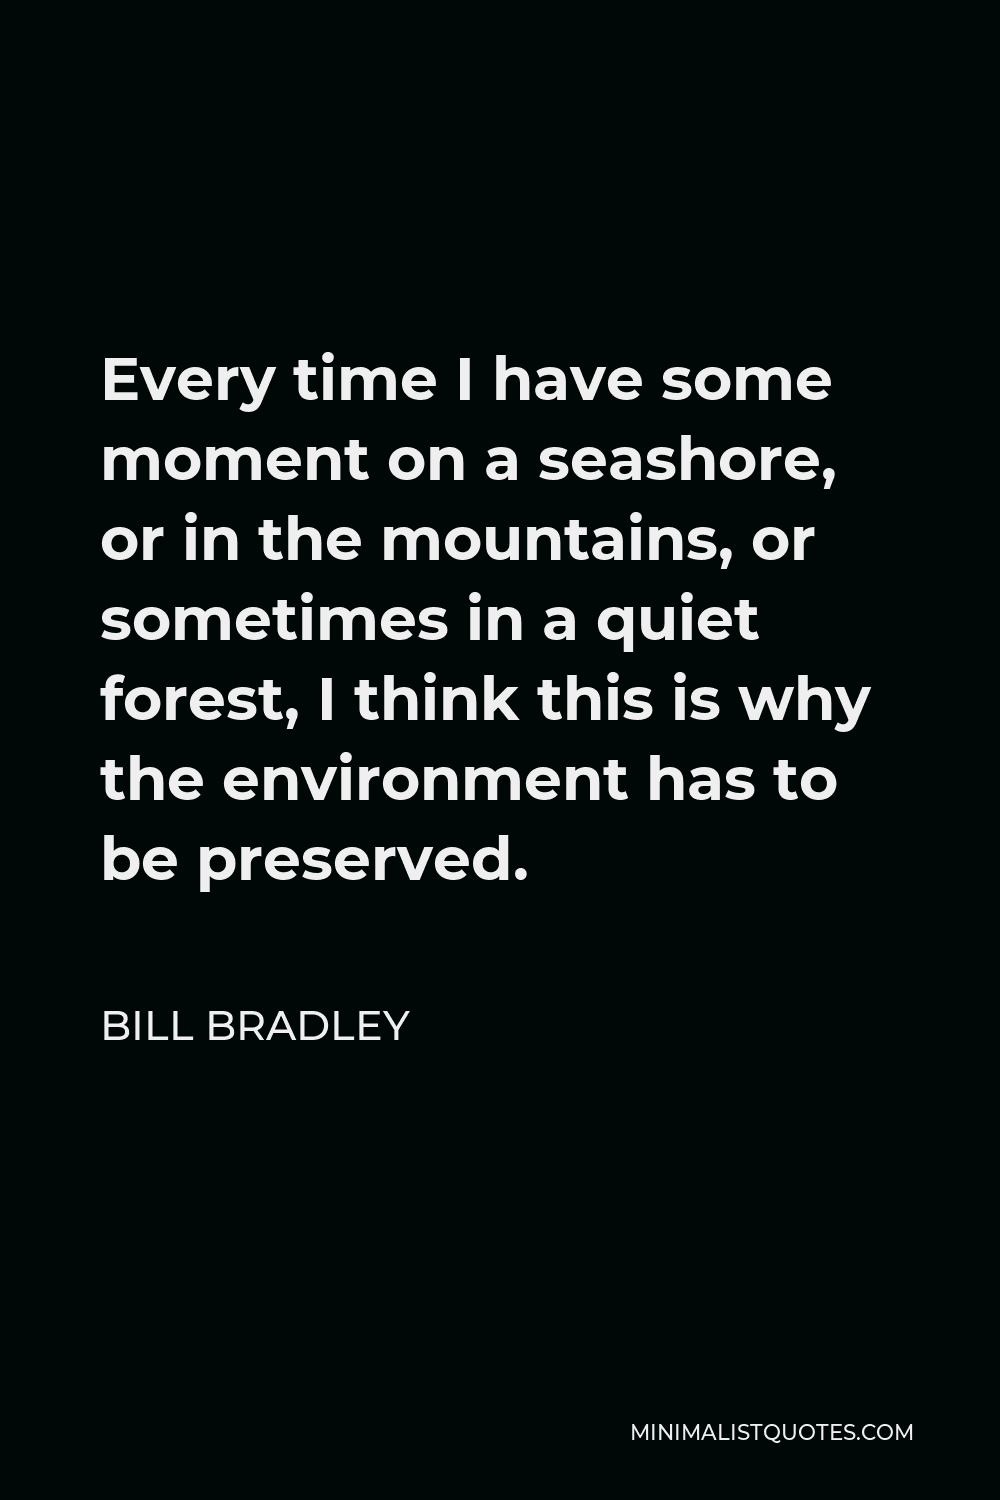 Bill Bradley Quote - Every time I have some moment on a seashore, or in the mountains, or sometimes in a quiet forest, I think this is why the environment has to be preserved.